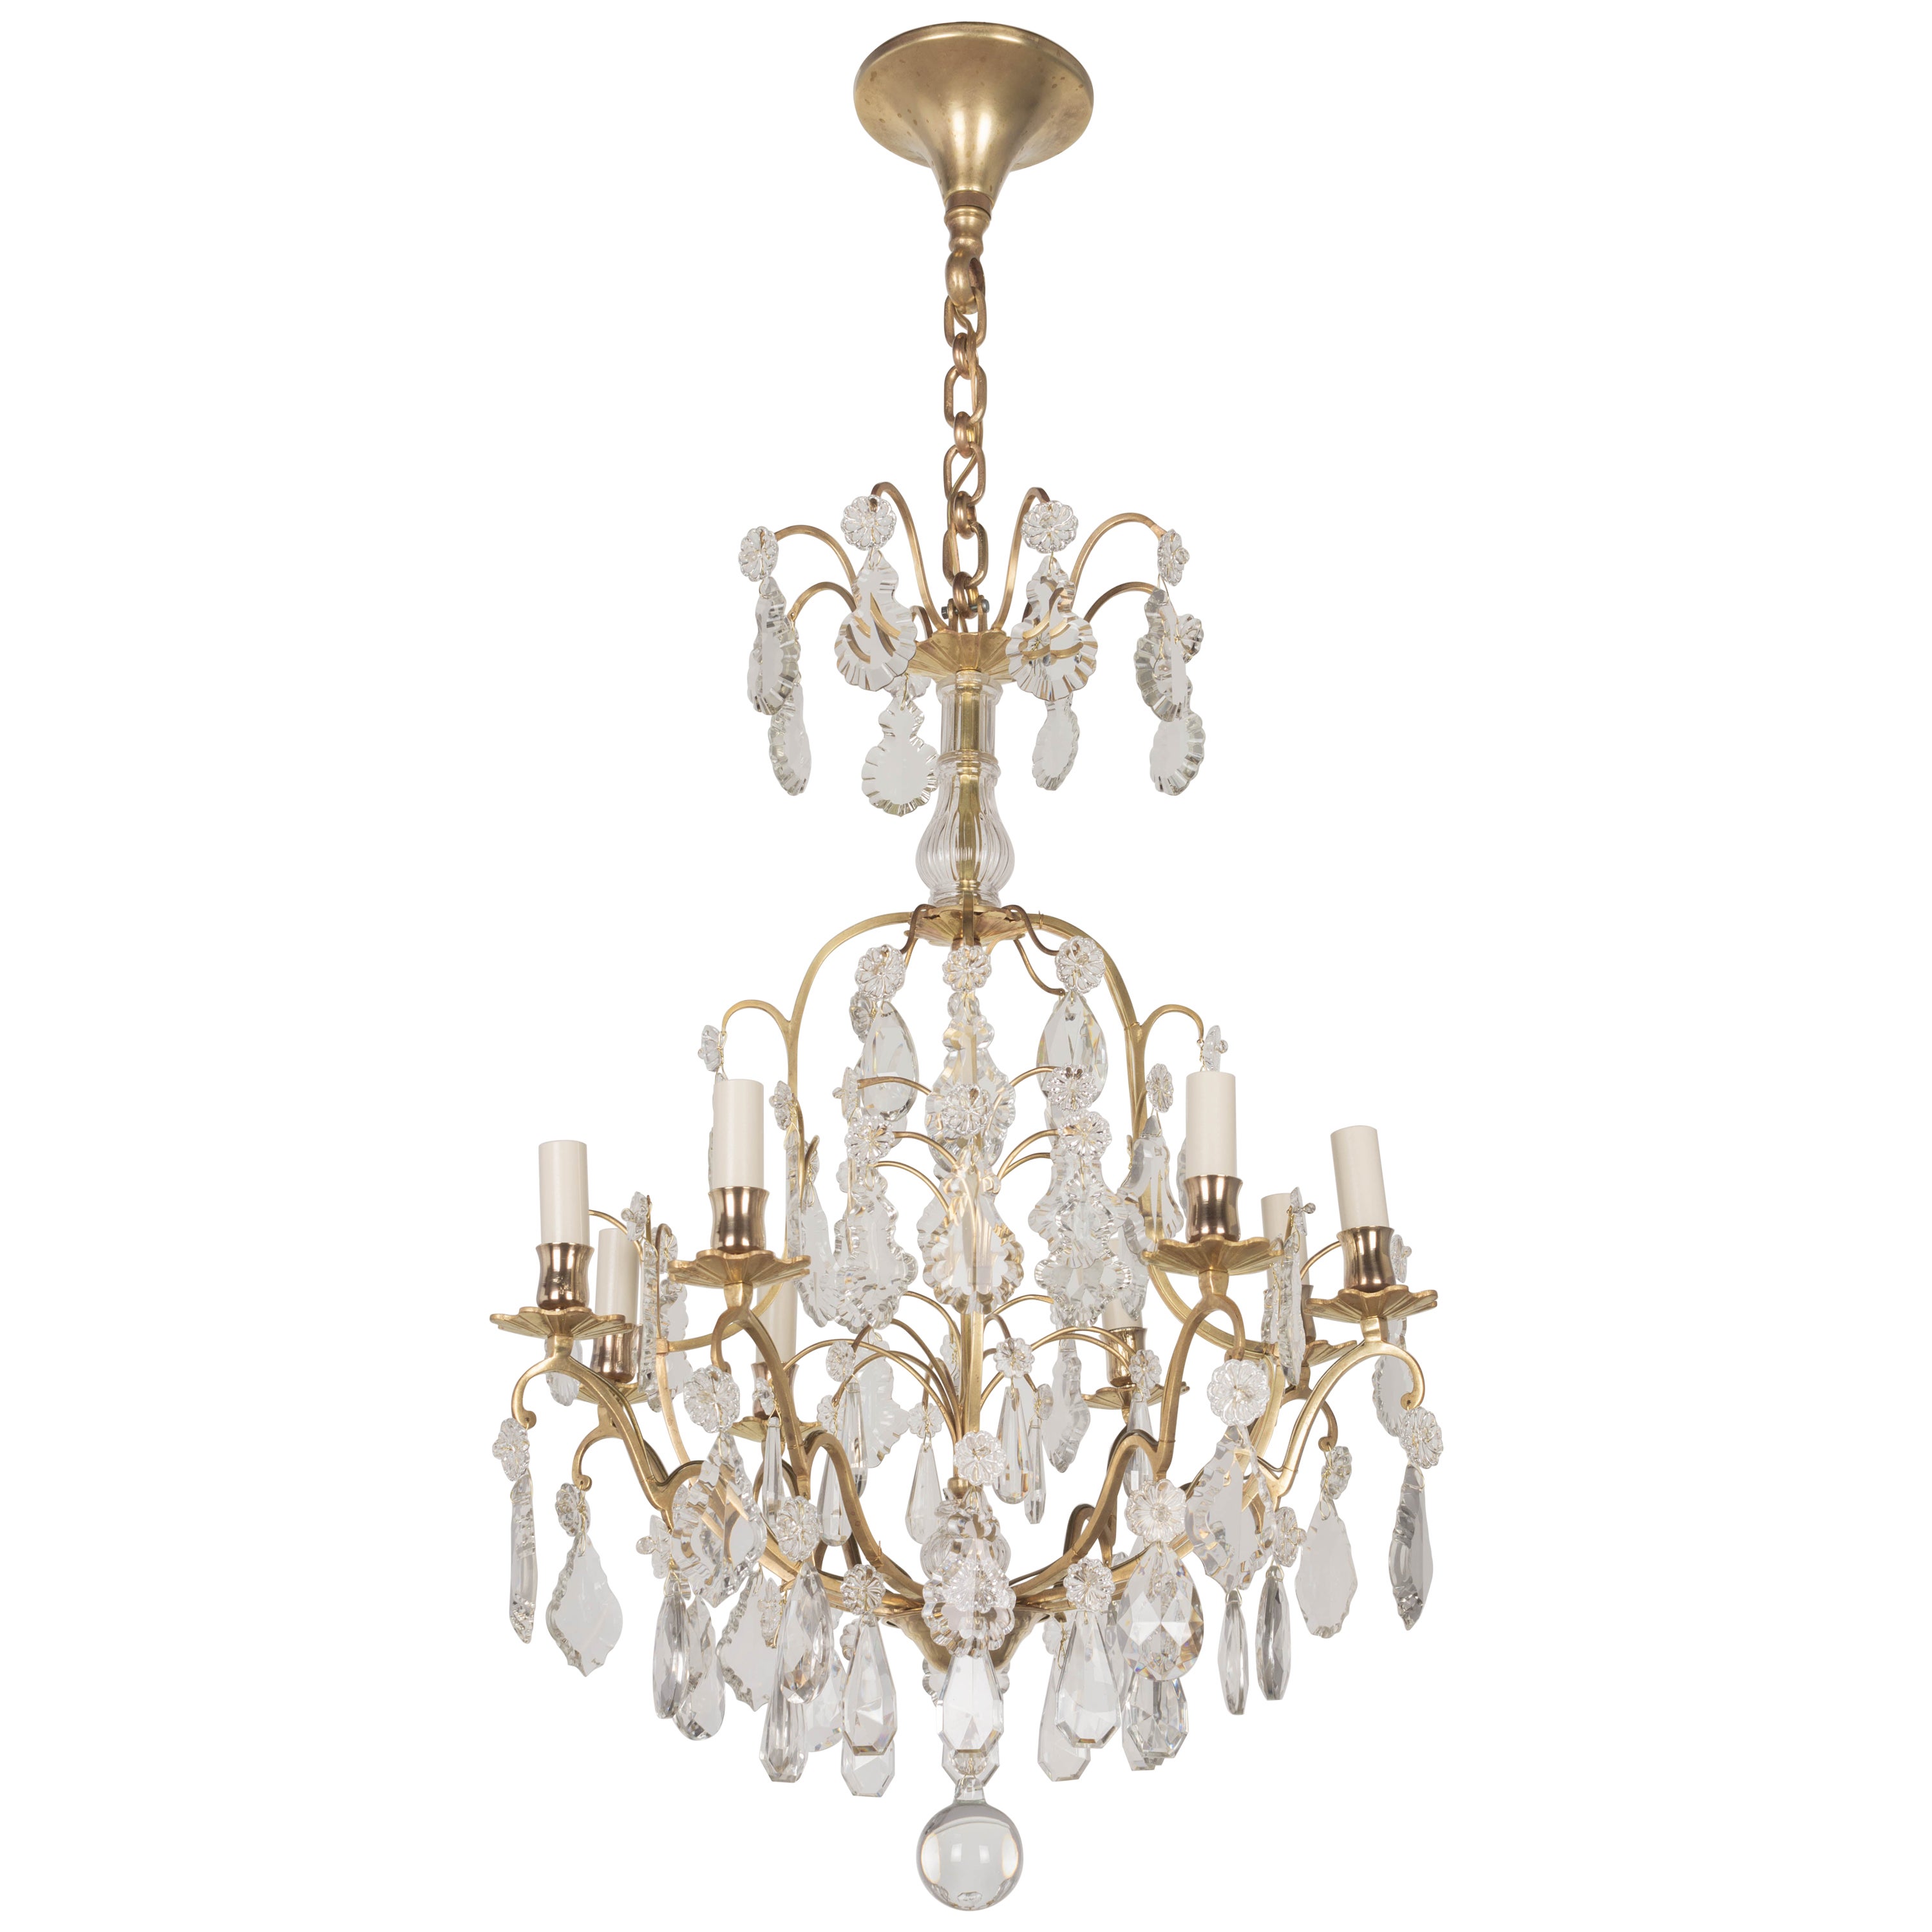 French Louis XV Style Crystal Chandelier